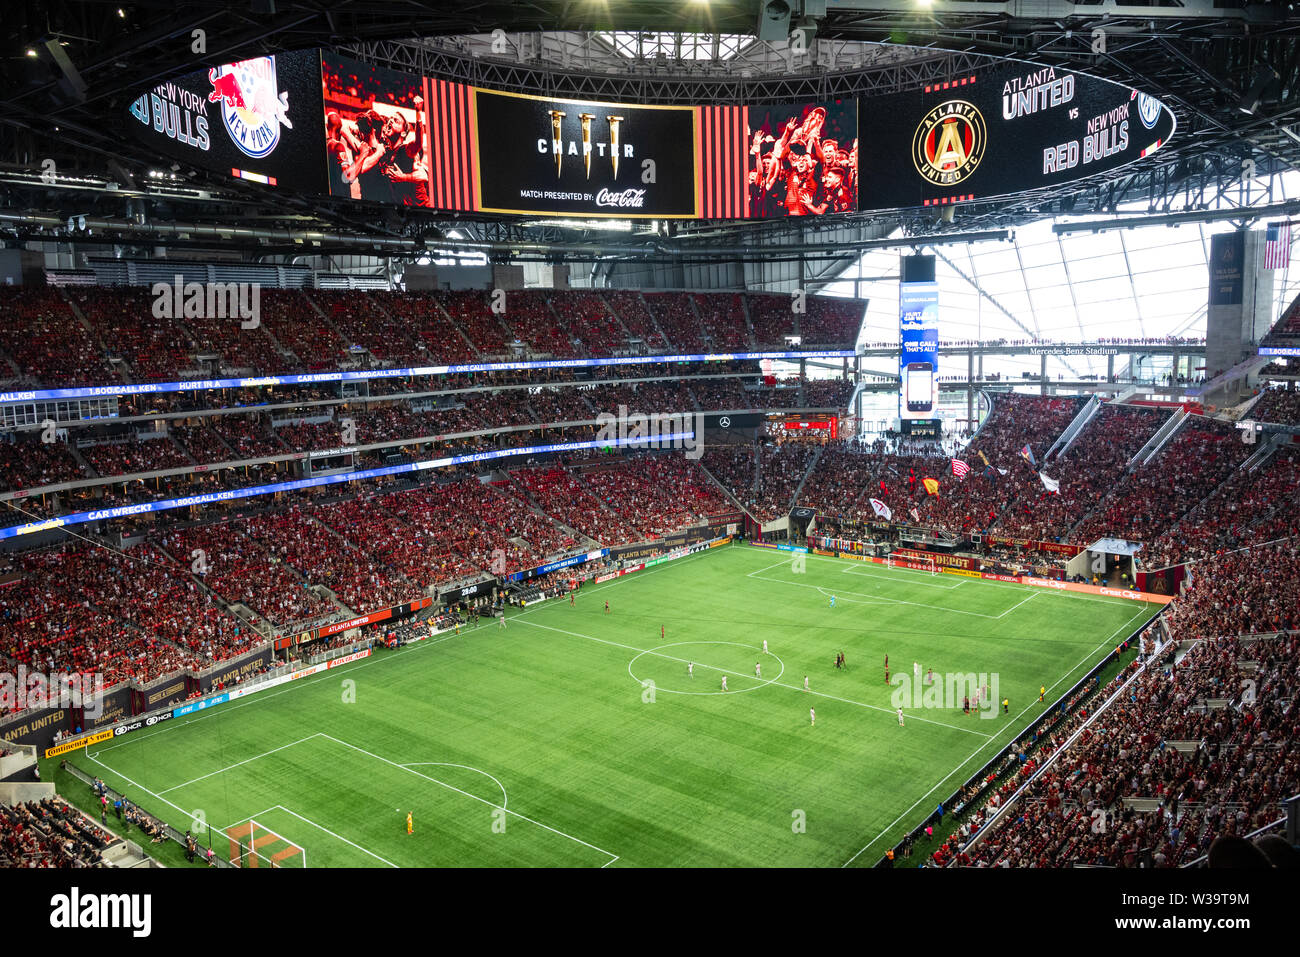 Major League Soccer game between Atlanta United FC and the New York Red Bulls at the Mercedes-Benz Stadium in downtown Atlanta, Georgia. (USA) Stock Photo